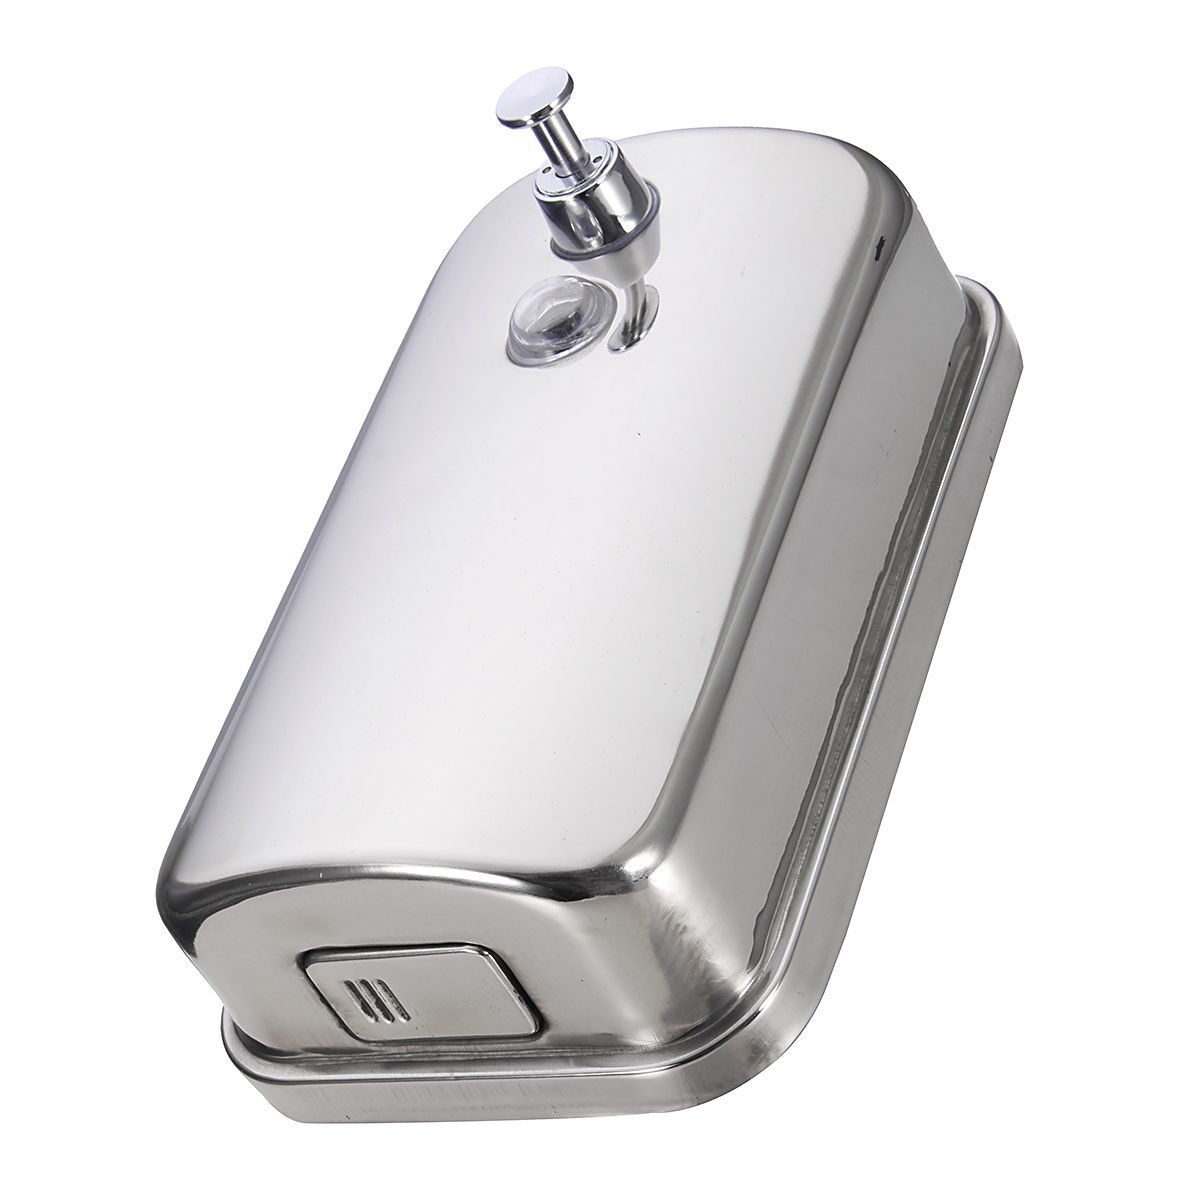 Bathroom-Kitchen-Stainless-Steel-Wall-Mounted-Lotion-Pump-Soap-Shampoo-Dispenser-1265805